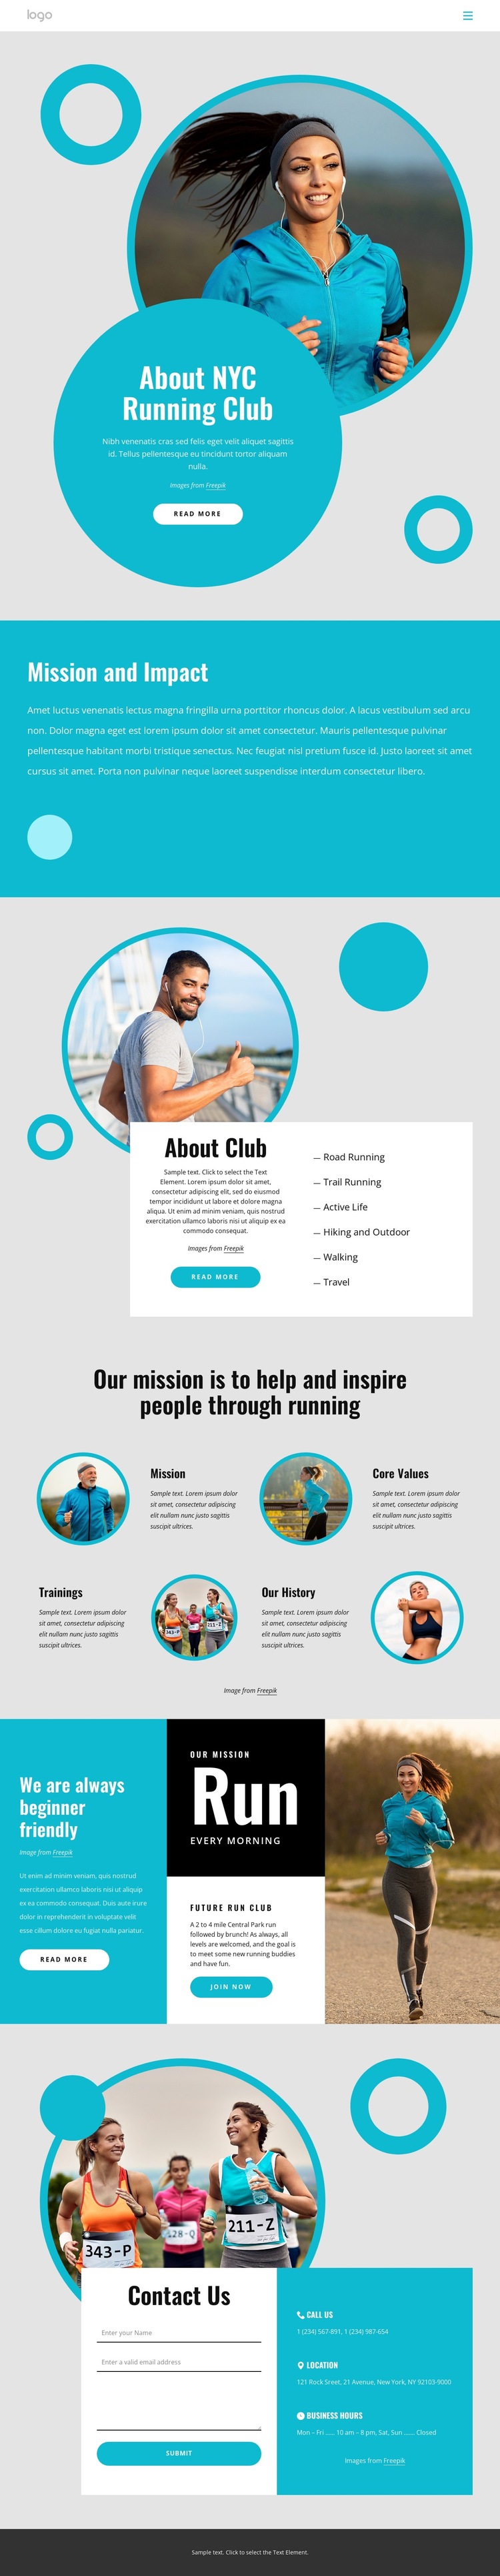 About NYC running club HTML5 Template